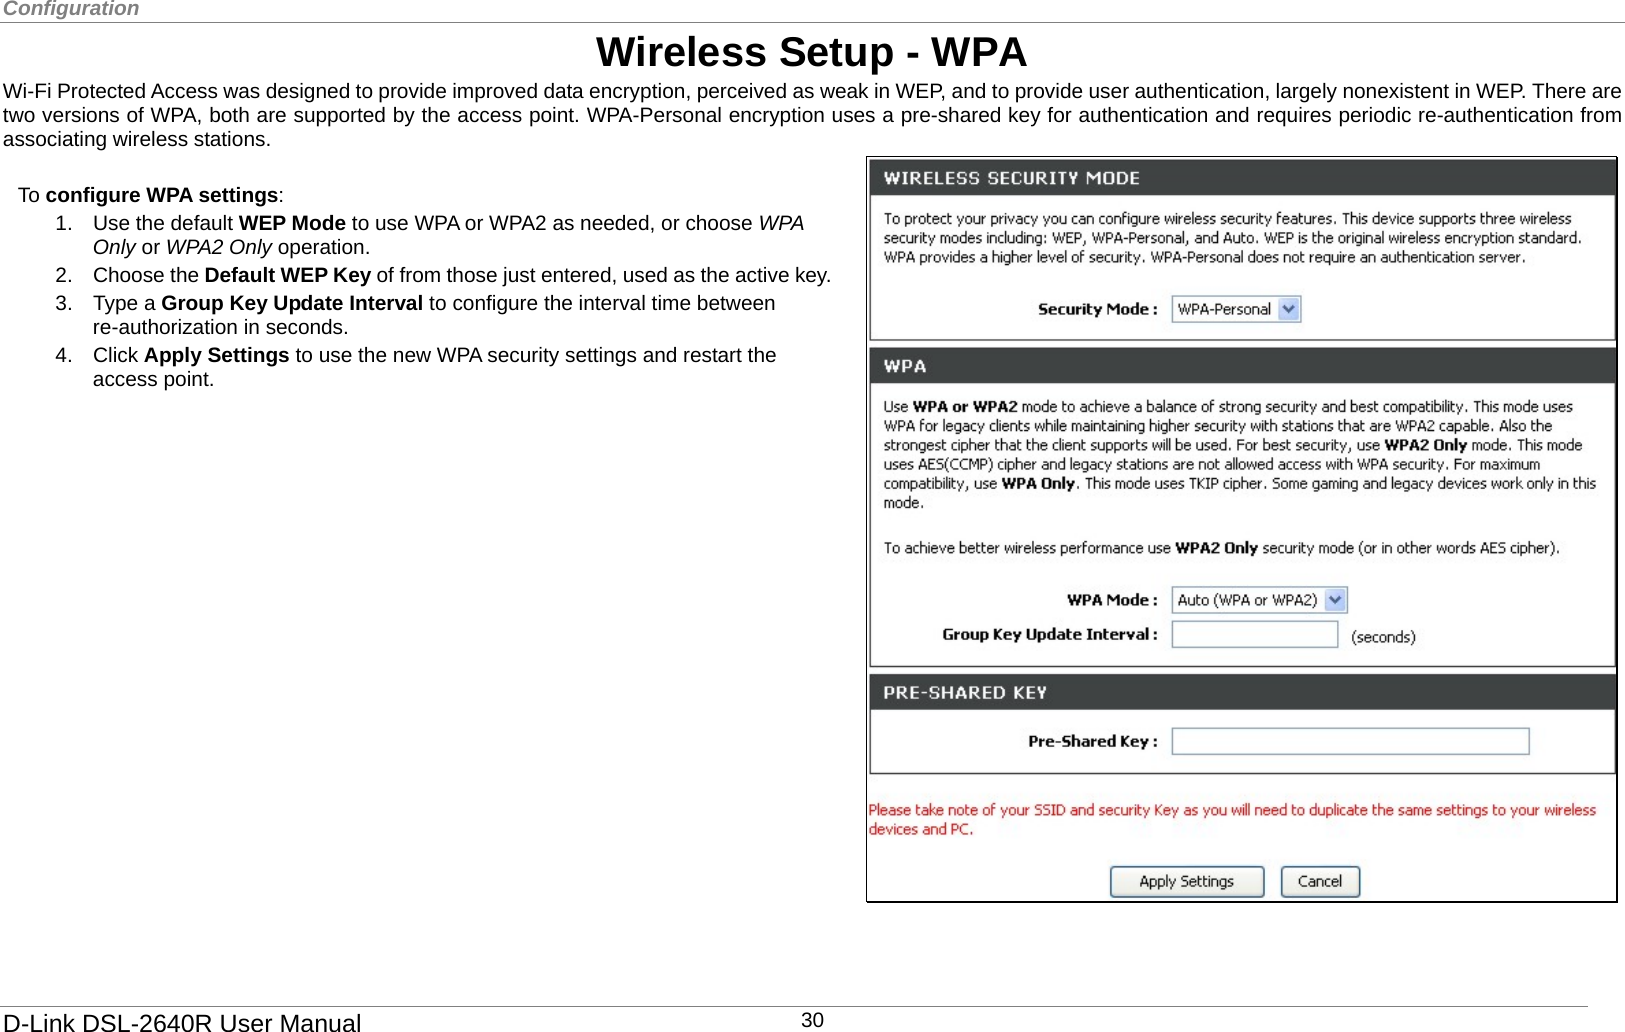 Configuration  Wireless Setup - WPA Wi-Fi Protected Access was designed to provide improved data encryption, perceived as weak in WEP, and to provide user authentication, largely nonexistent in WEP. There are two versions of WPA, both are supported by the access point. WPA-Personal encryption uses a pre-shared key for authentication and requires periodic re-authentication from associating wireless stations.    4. Click Apply Settings to use the new WPA security settings and restart the access point. To configure WPA settings: 1.  Use the default WEP Mode to use WPA or WPA2 as needed, or choose WPA Only or WPA2 Only operation.   2. Choose the Default WEP Key of from those just entered, used as the active key.3. Type a Group Key Update Interval to configure the interval time between re-authorization in seconds.   D-Link DSL-2640R User Manual 30